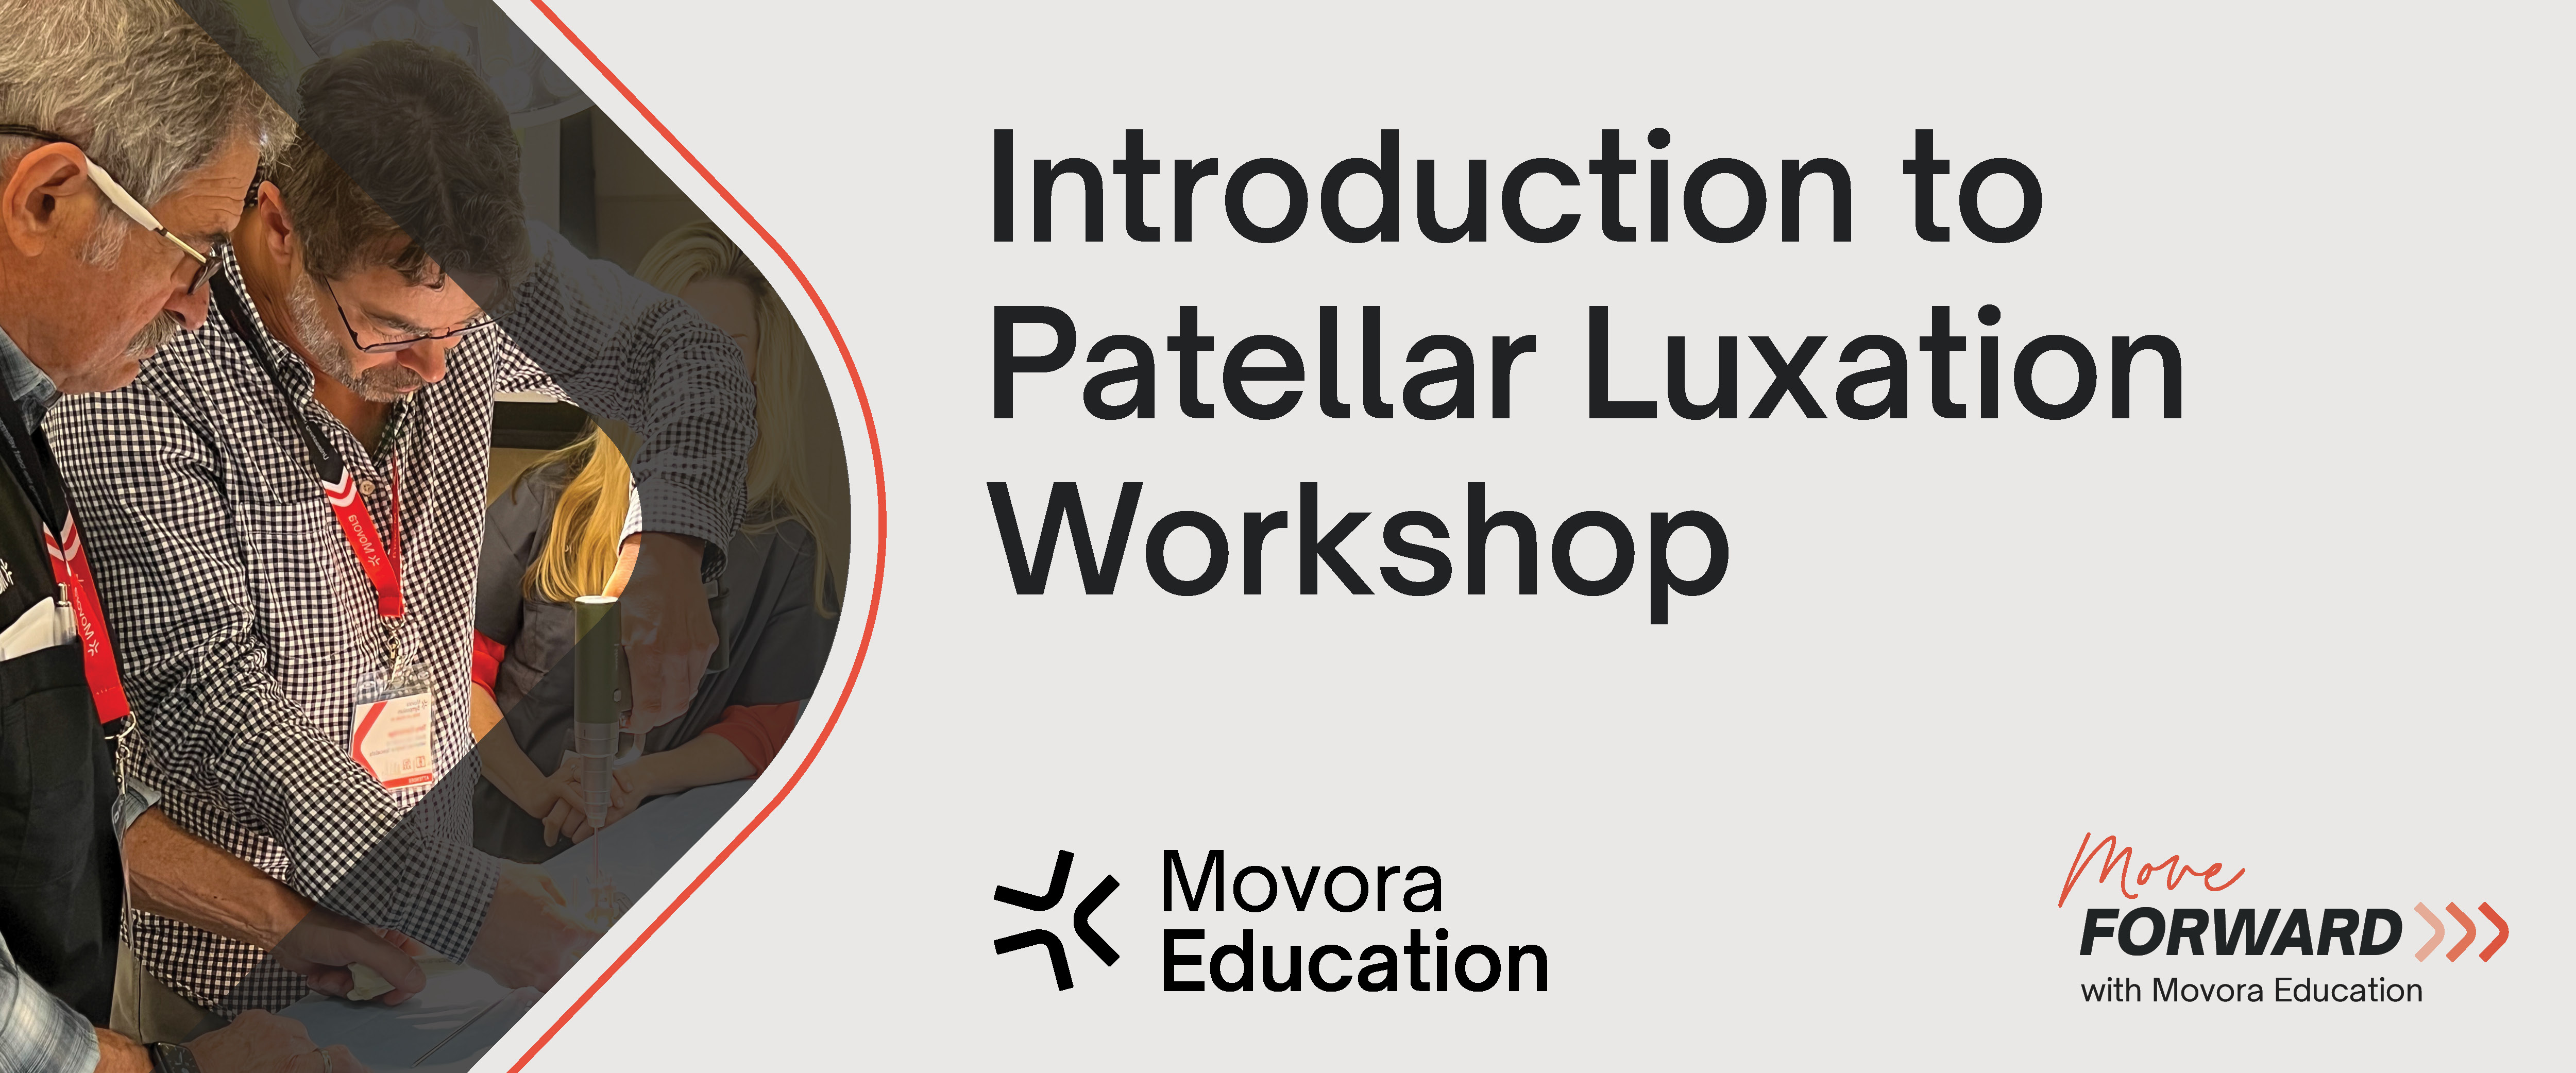 Movora Introduction to Patellar Luxation banner